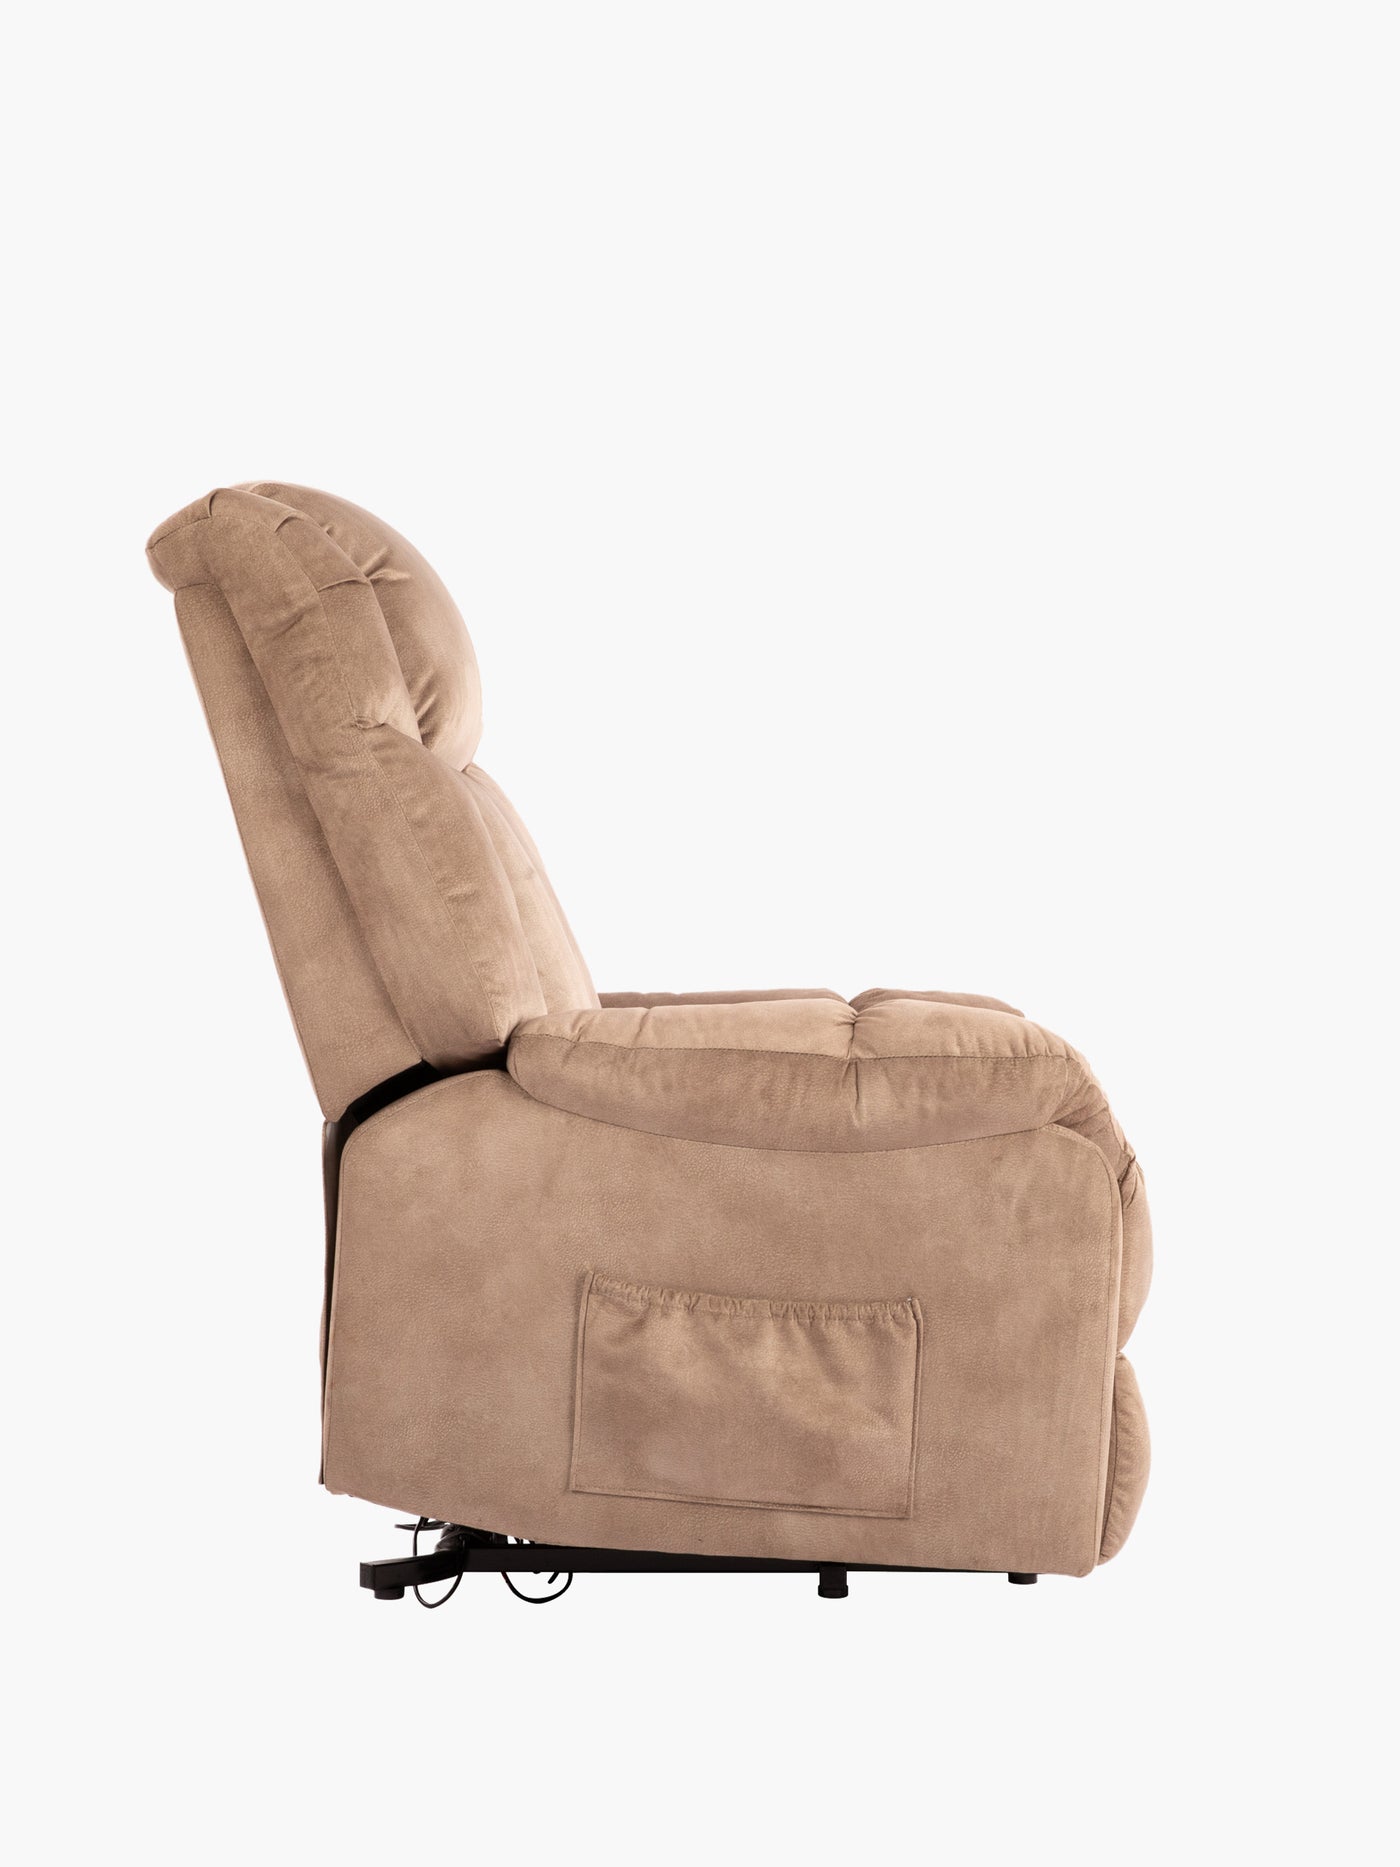 COLAMY Fabric Electric Power Lift Recliner Chair CL8233 Camel #color_camel